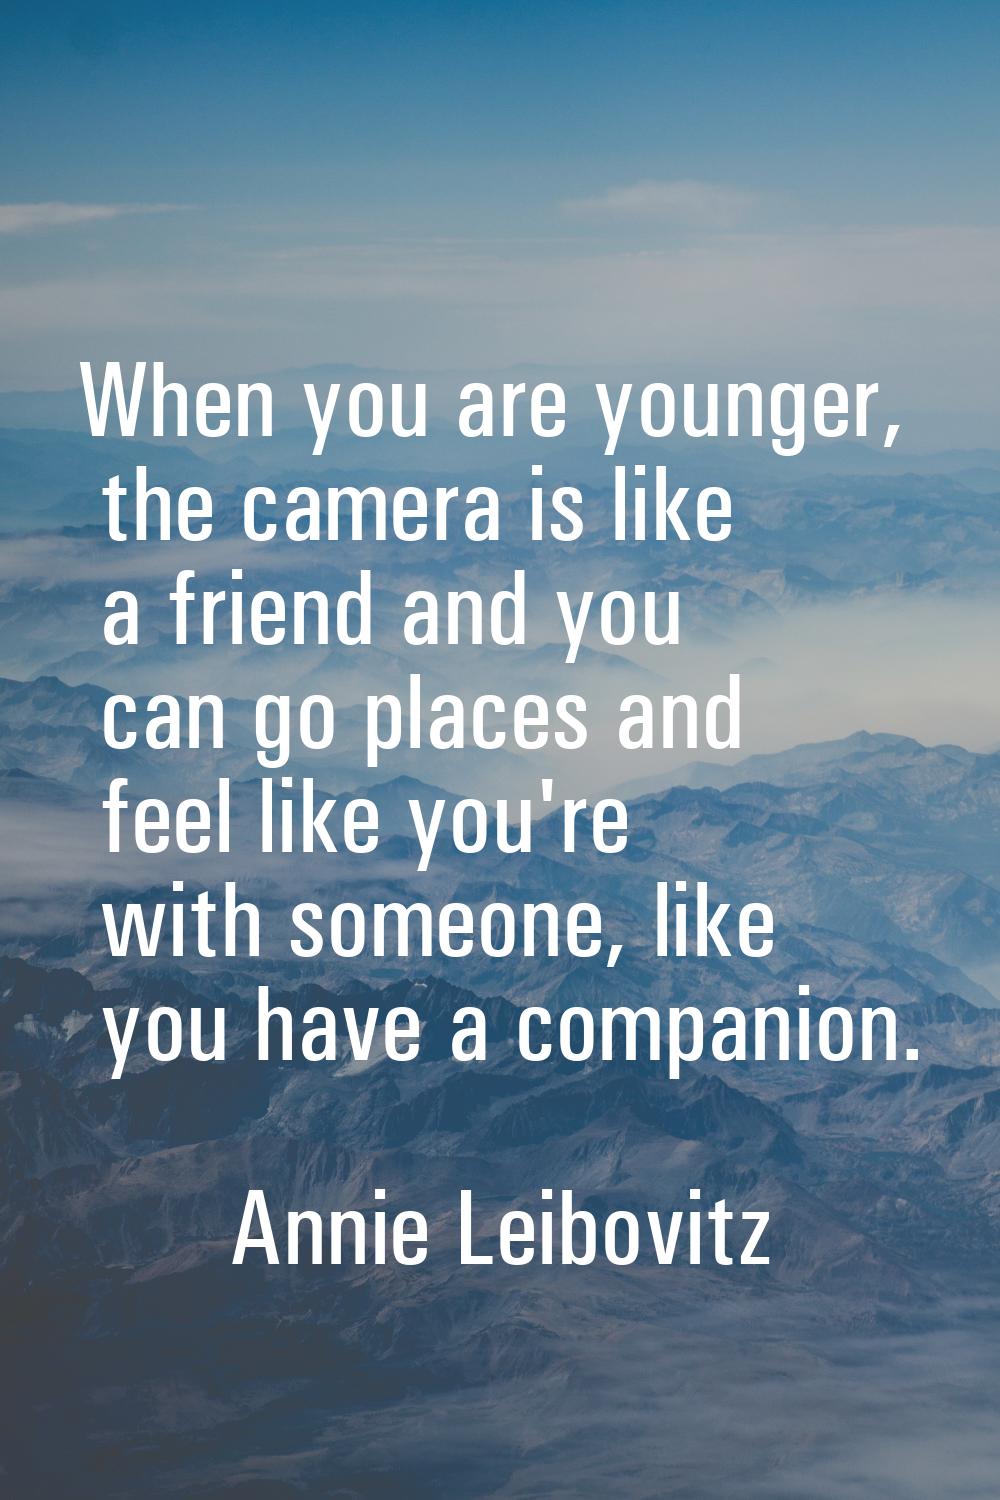 When you are younger, the camera is like a friend and you can go places and feel like you're with s